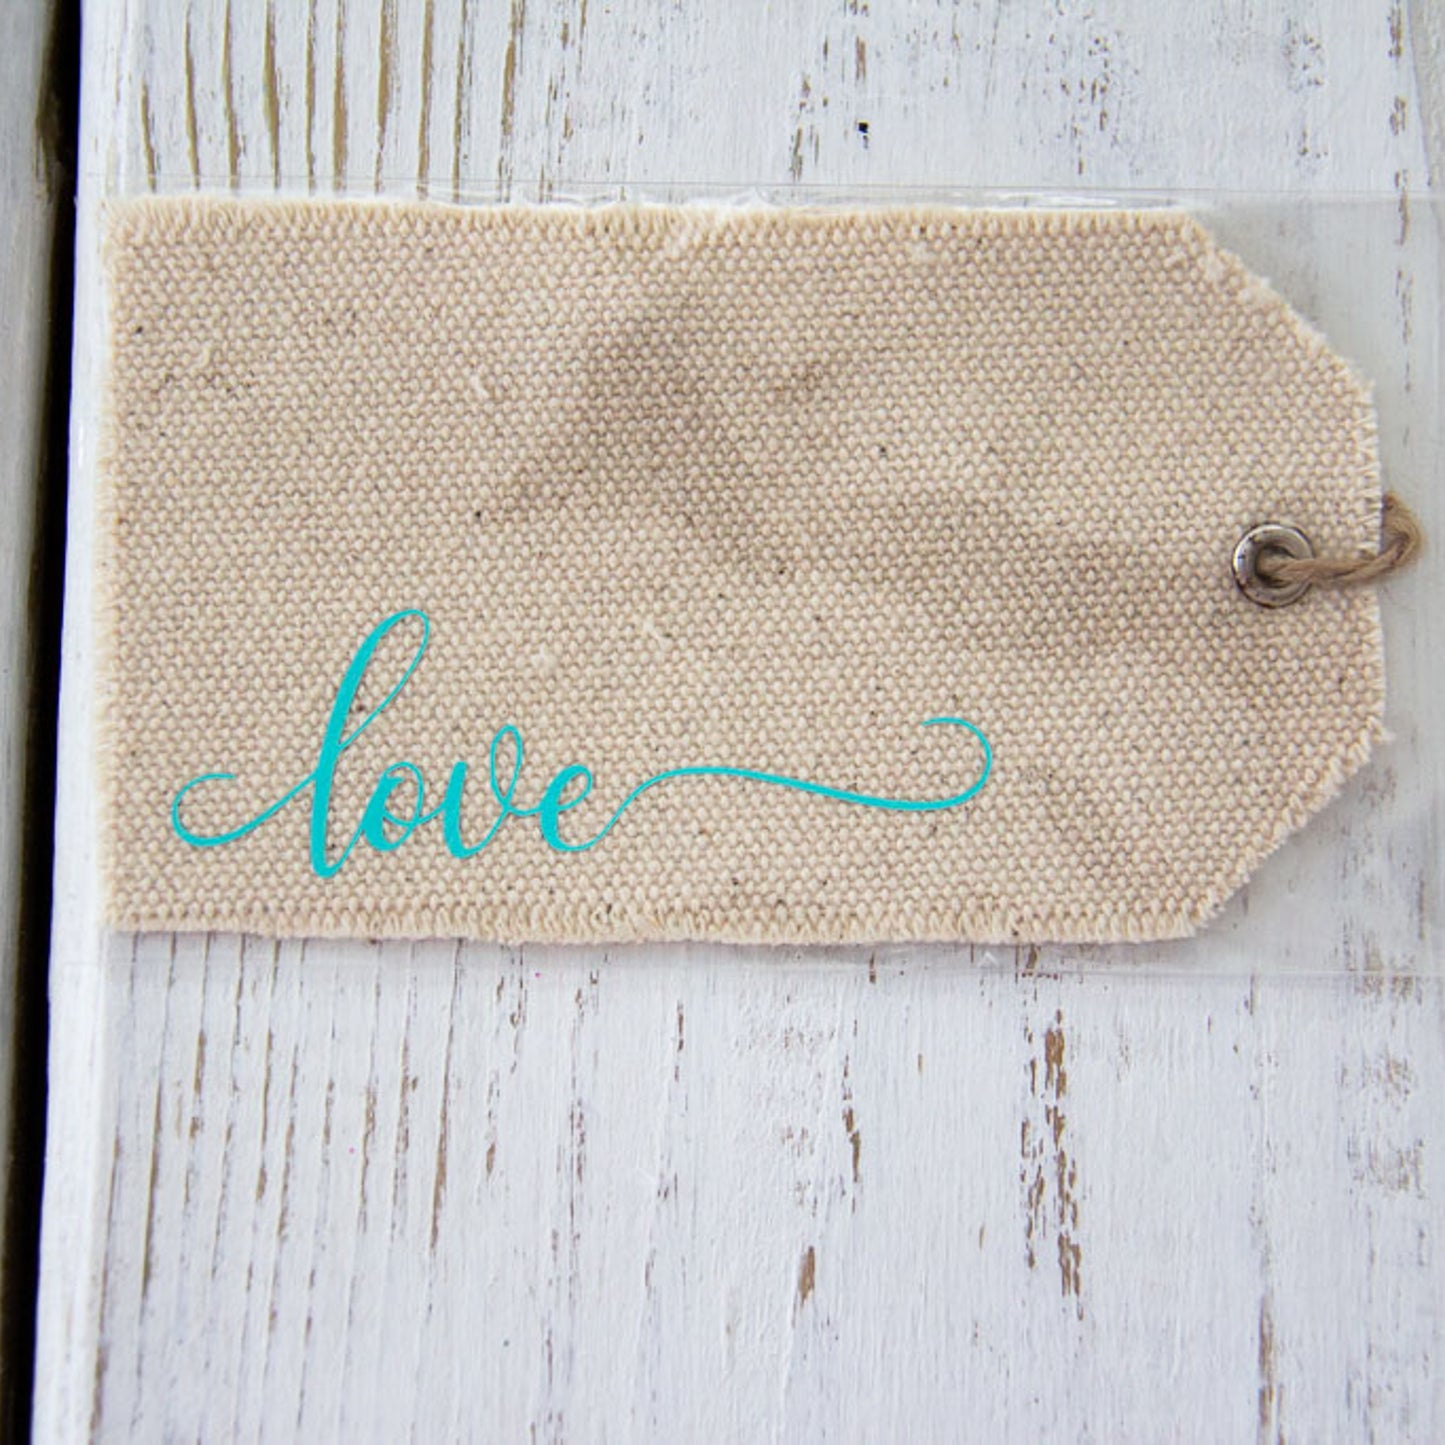 Love - Canvas Gift Tag